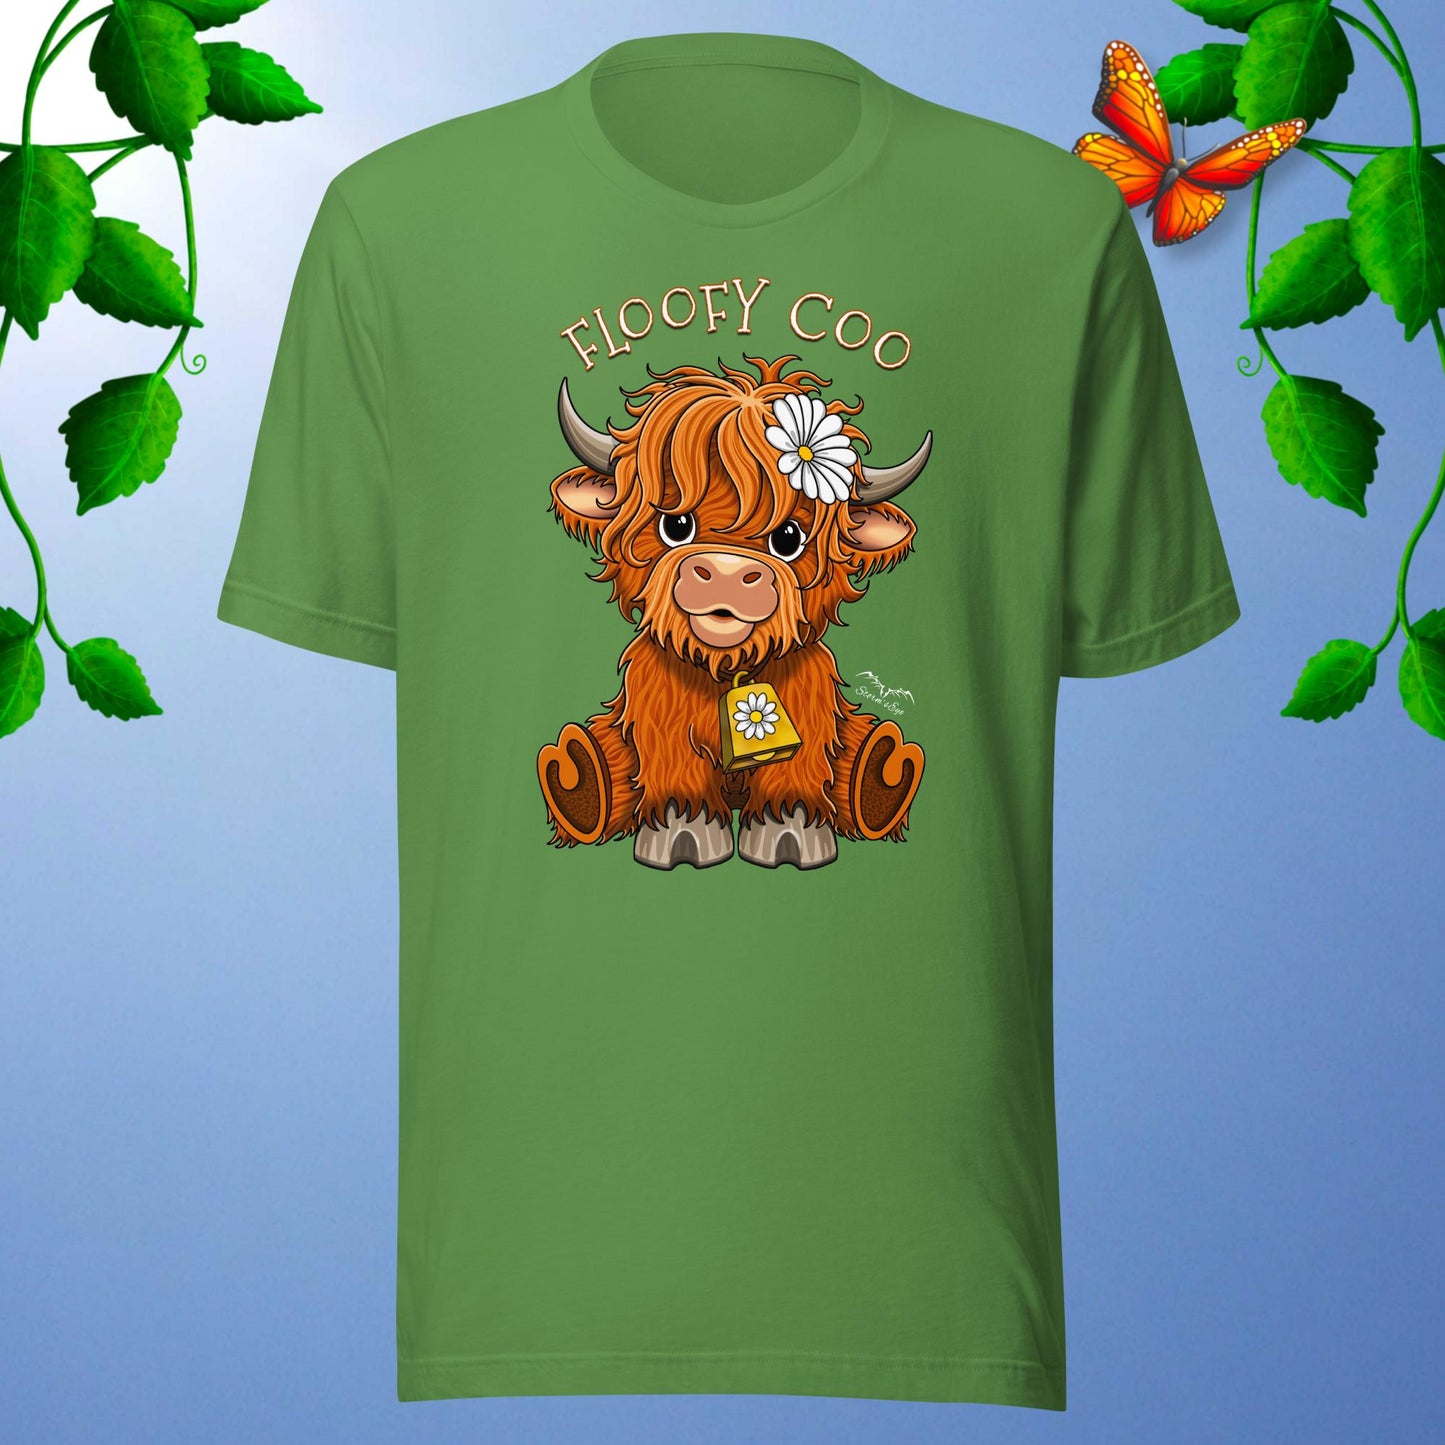 floofy coo highland cow T-shirt, bright green by Stormseye Design